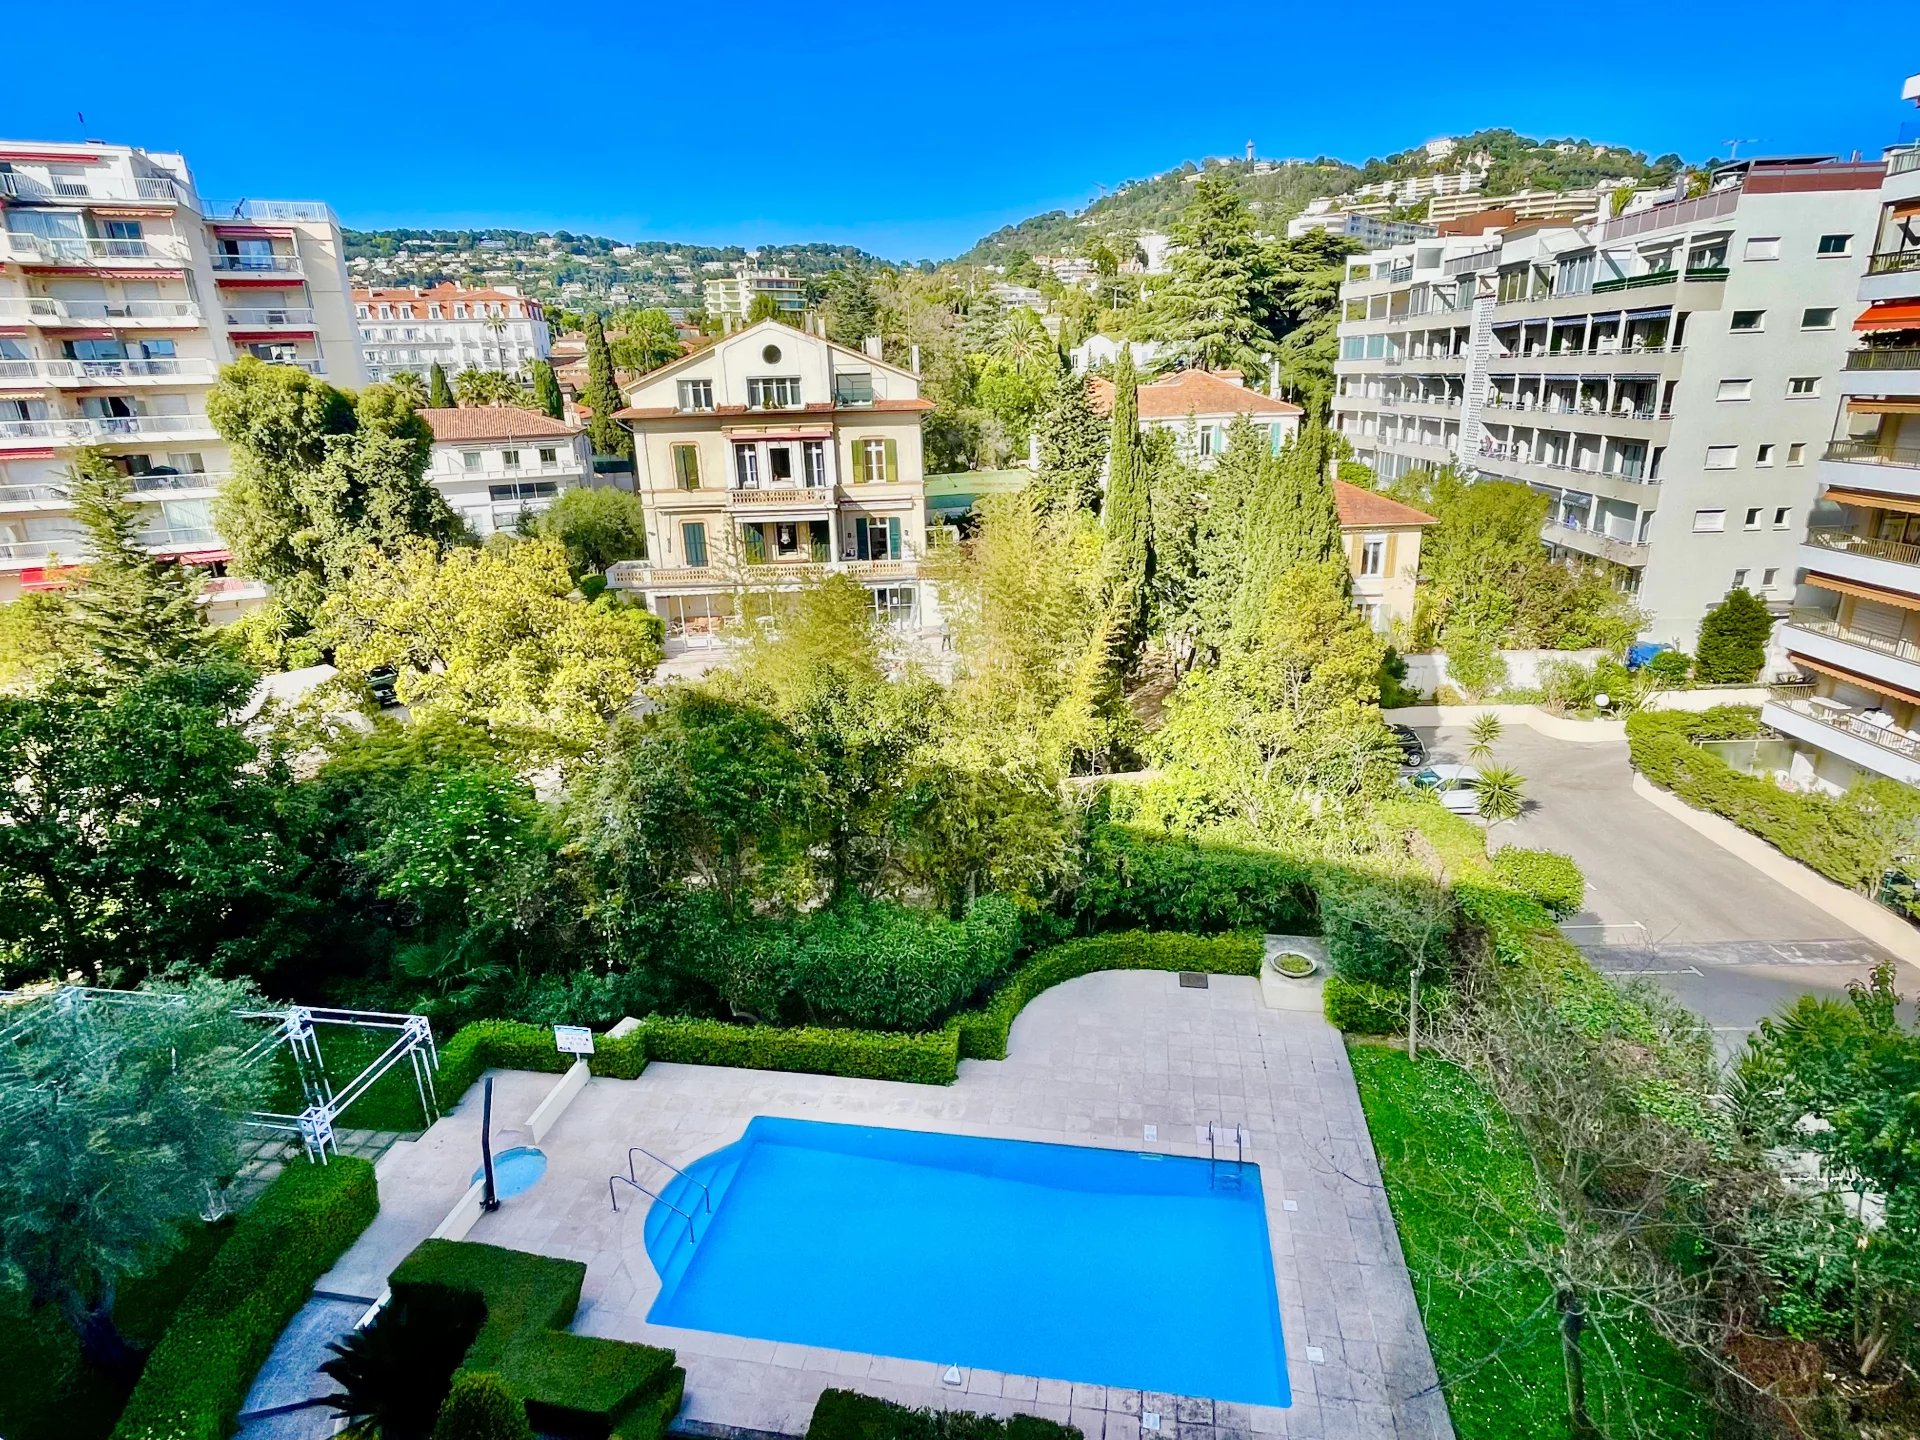 CANNES SALE APARTMENT 3P NEAR CENTER AND BEACHES. SWIMMING POOL IN RESIDENCE